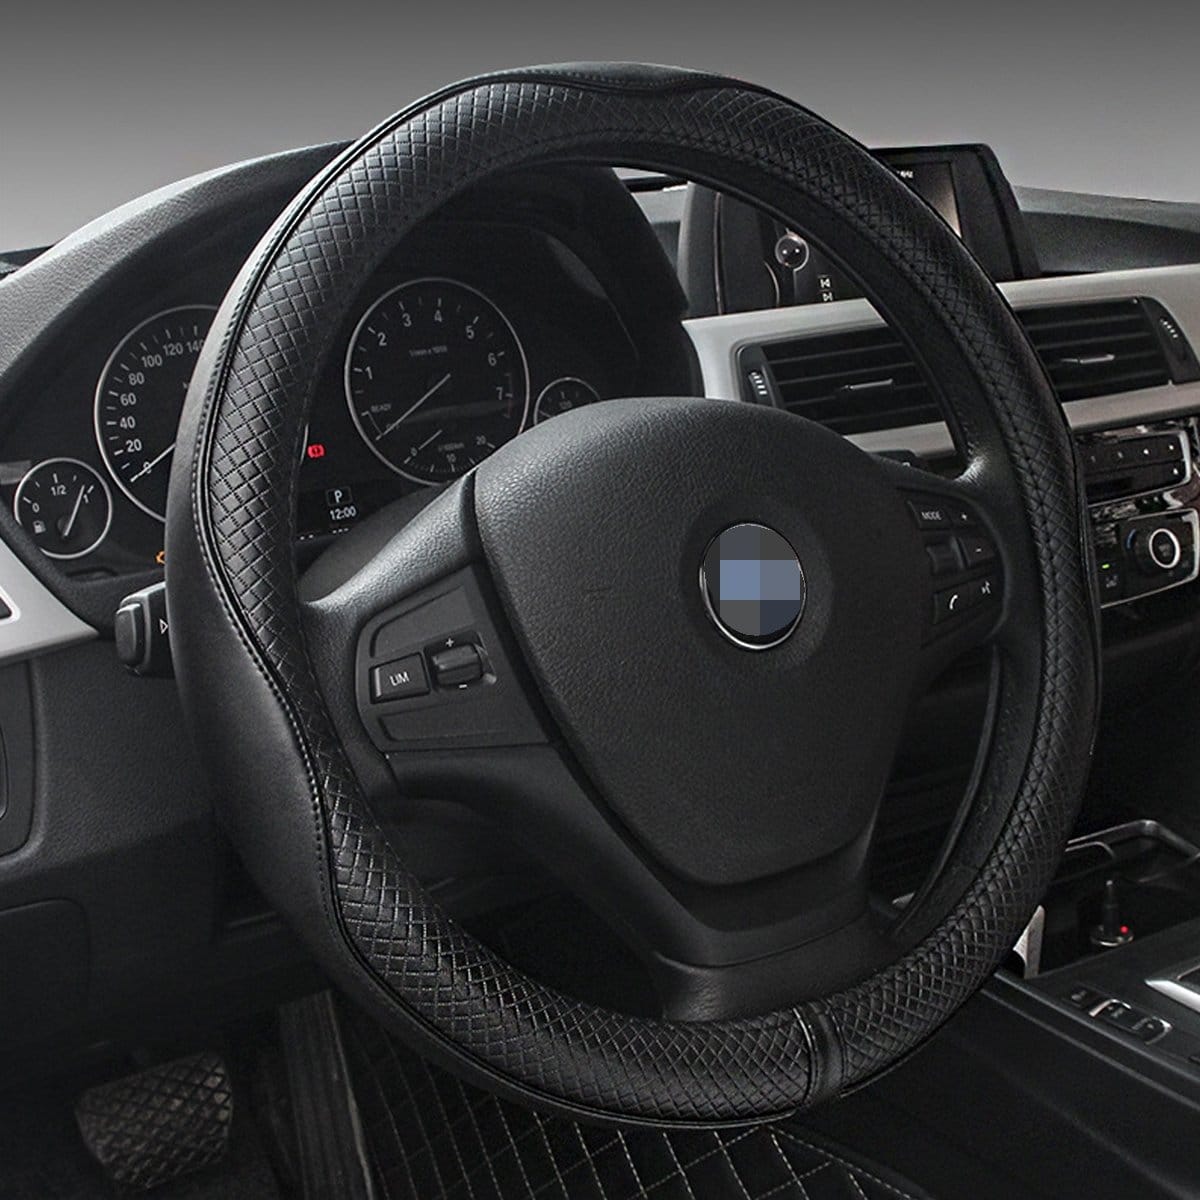 Review of Microfiber and Leather Steering Wheel Cover